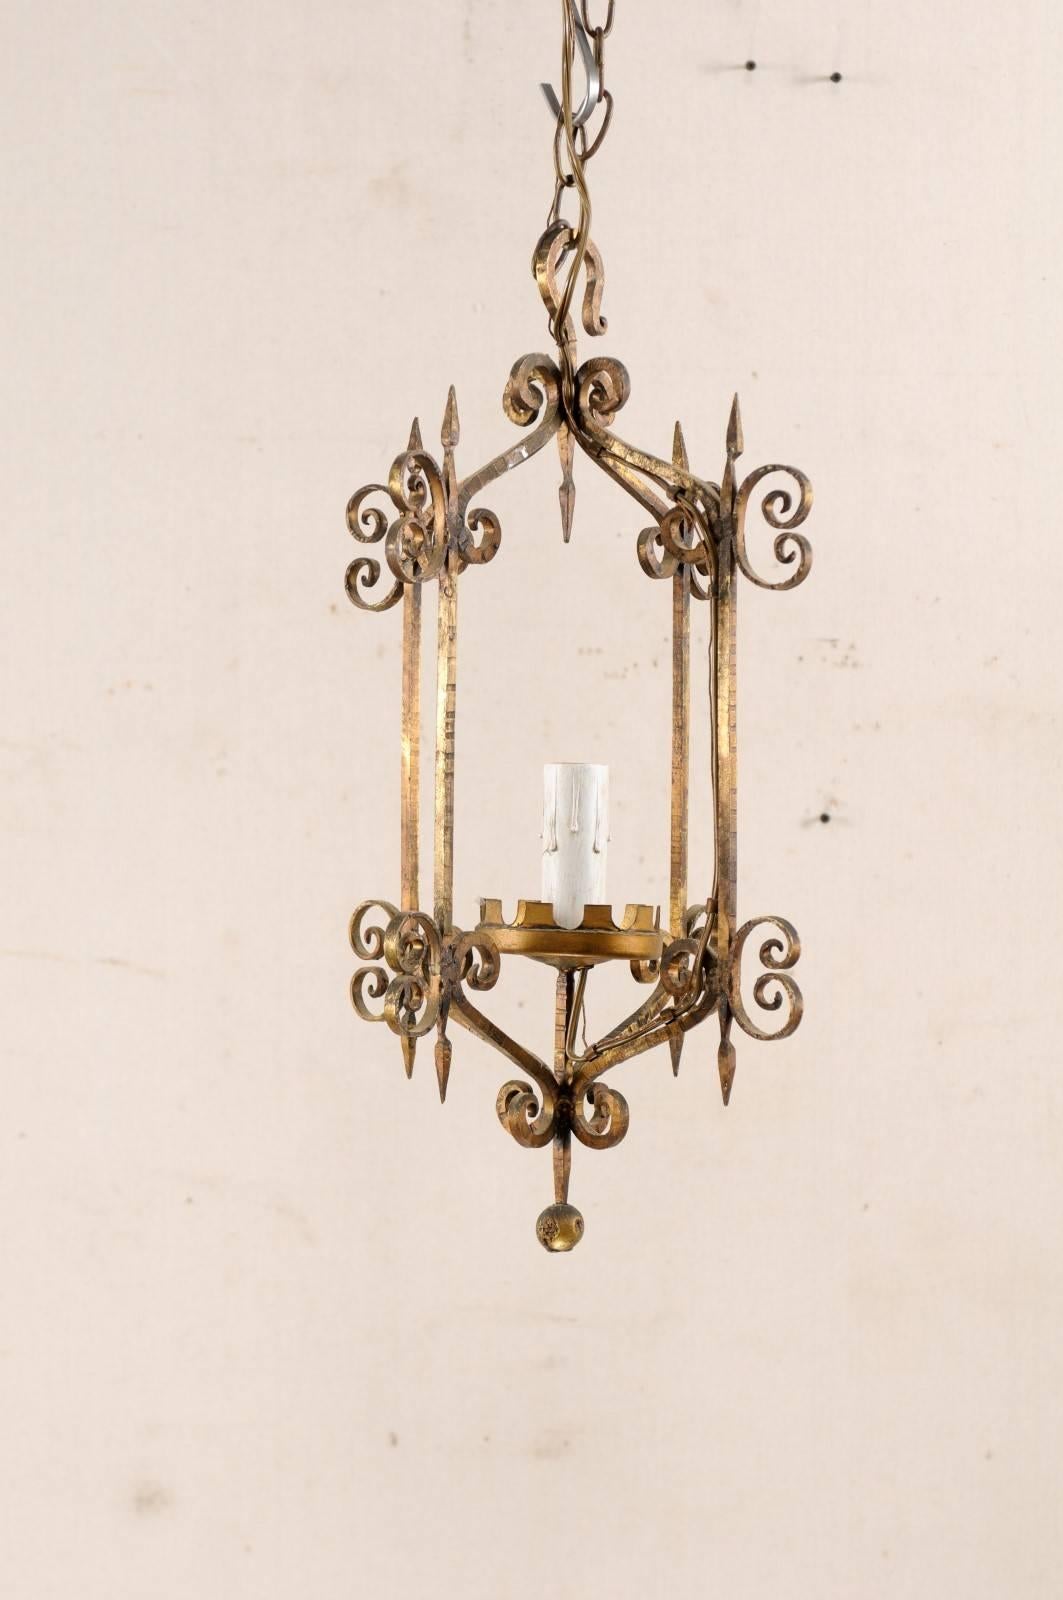 French Mid-20th Century Single Light Scrolled Iron Chandelier in Gold Bronze Hue In Good Condition For Sale In Atlanta, GA